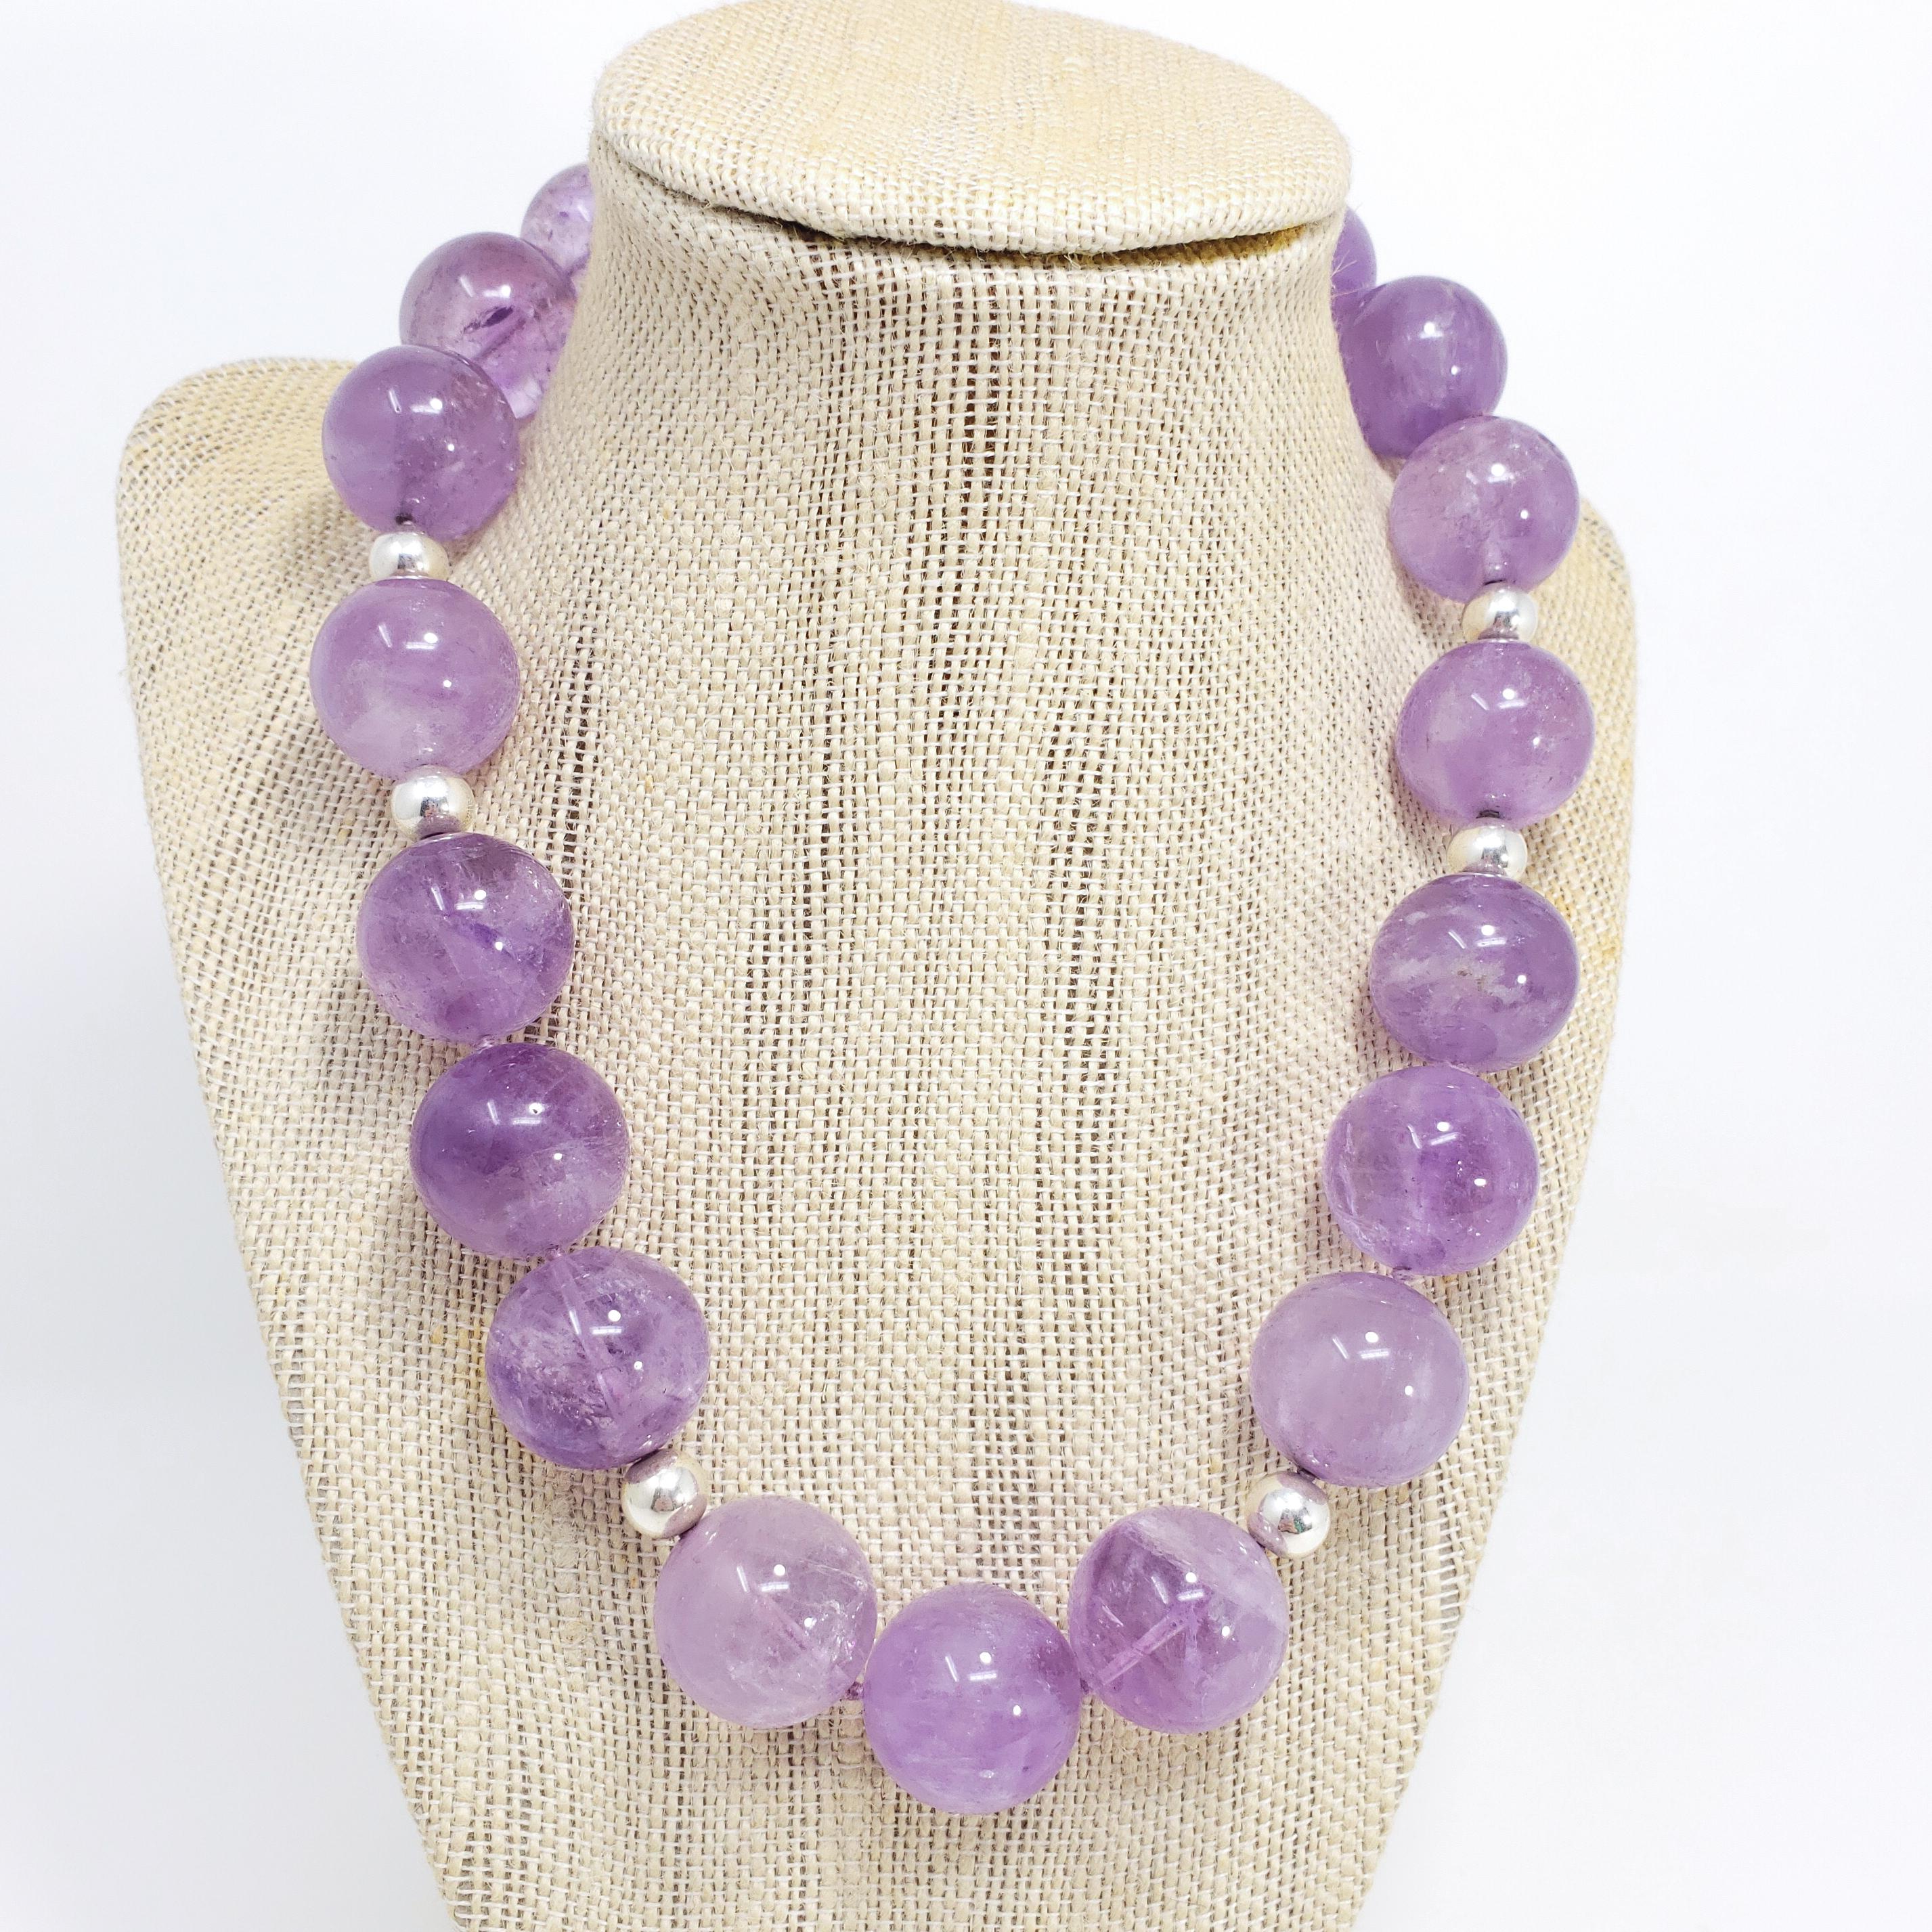 Round Cut Large Genuine Amethyst 20mm Bead Necklace with Sterling Silver Beads, 18.5